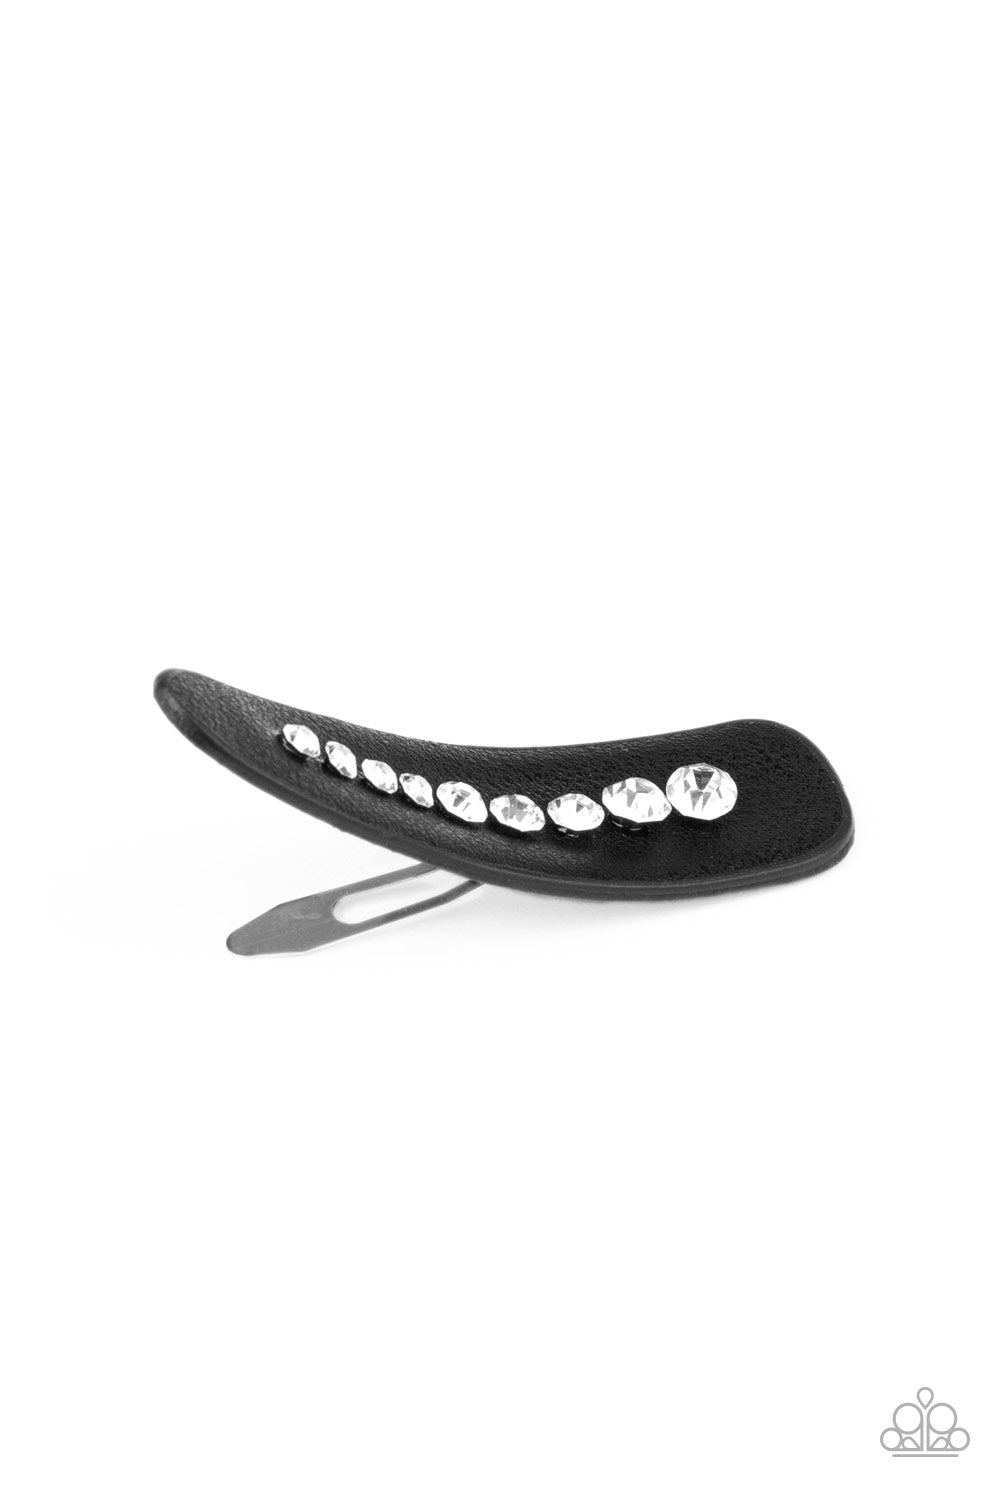 Snap Out Of It! - black - Paparazzi hair clip